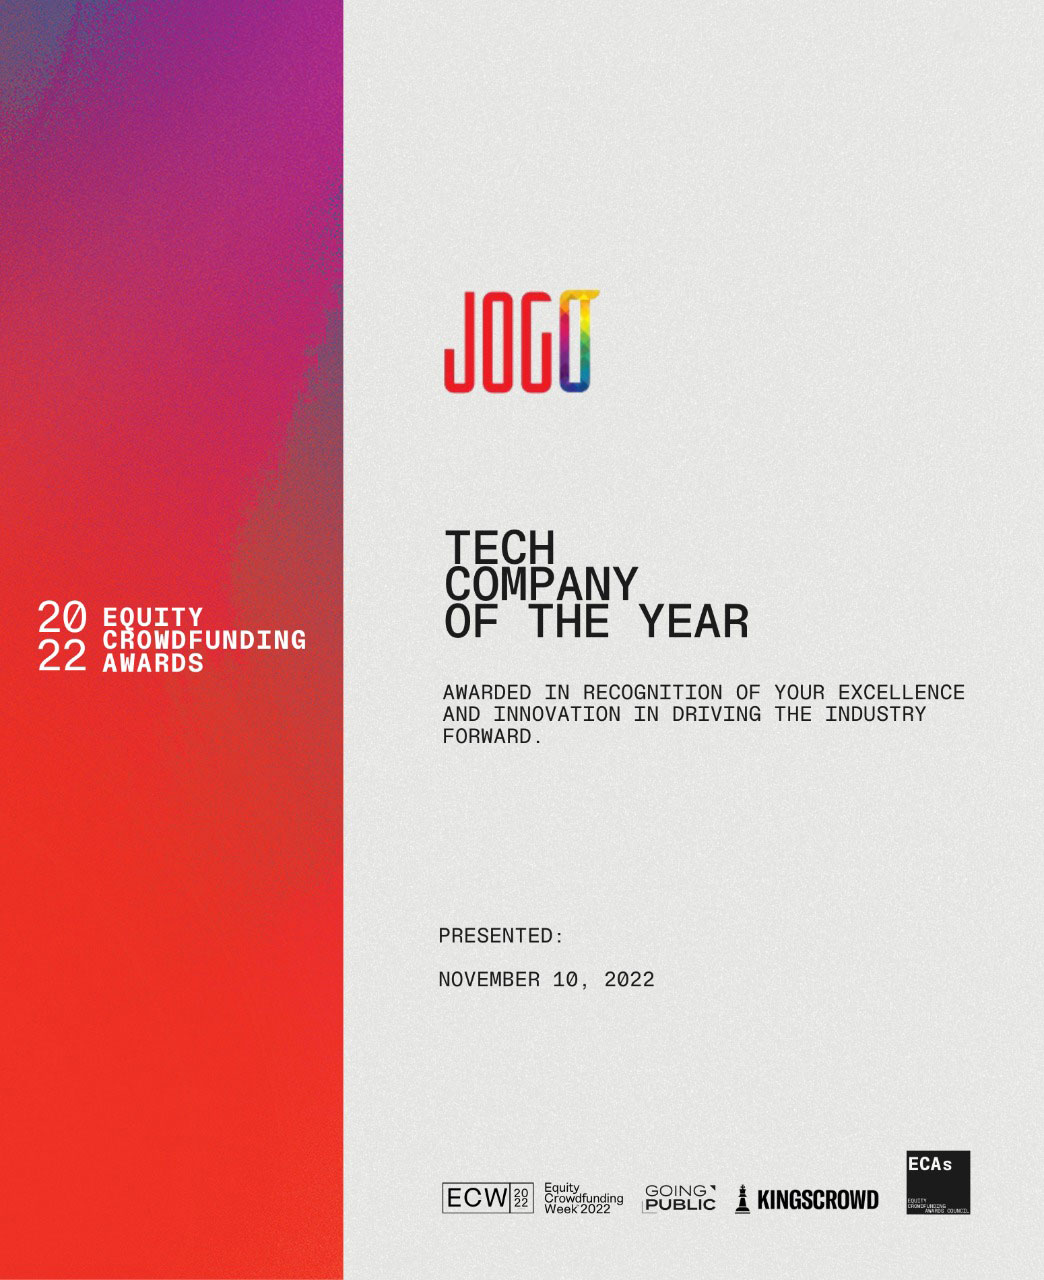 Scaled image of a certificate awarded to JOGO as the TECH COMPANY OF THE YEAR.